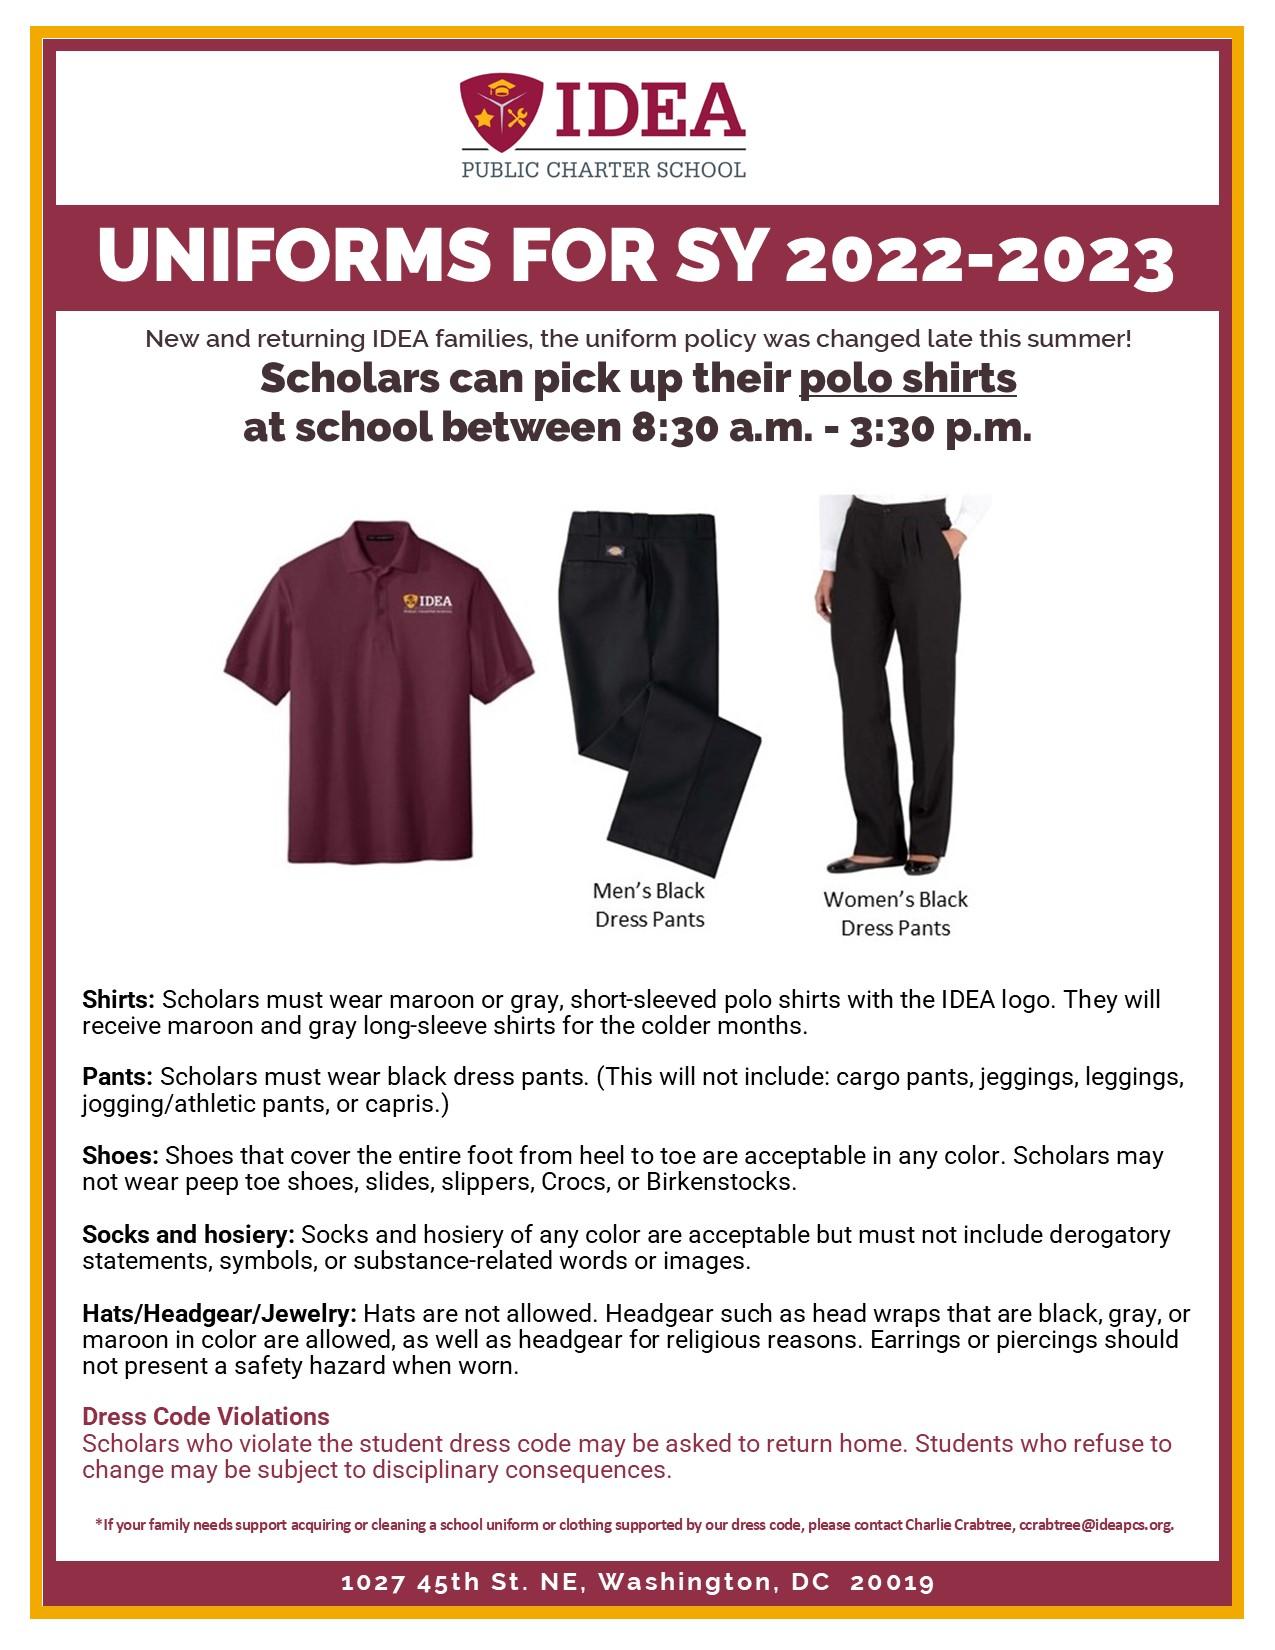 New uniform policy for 2022-2023